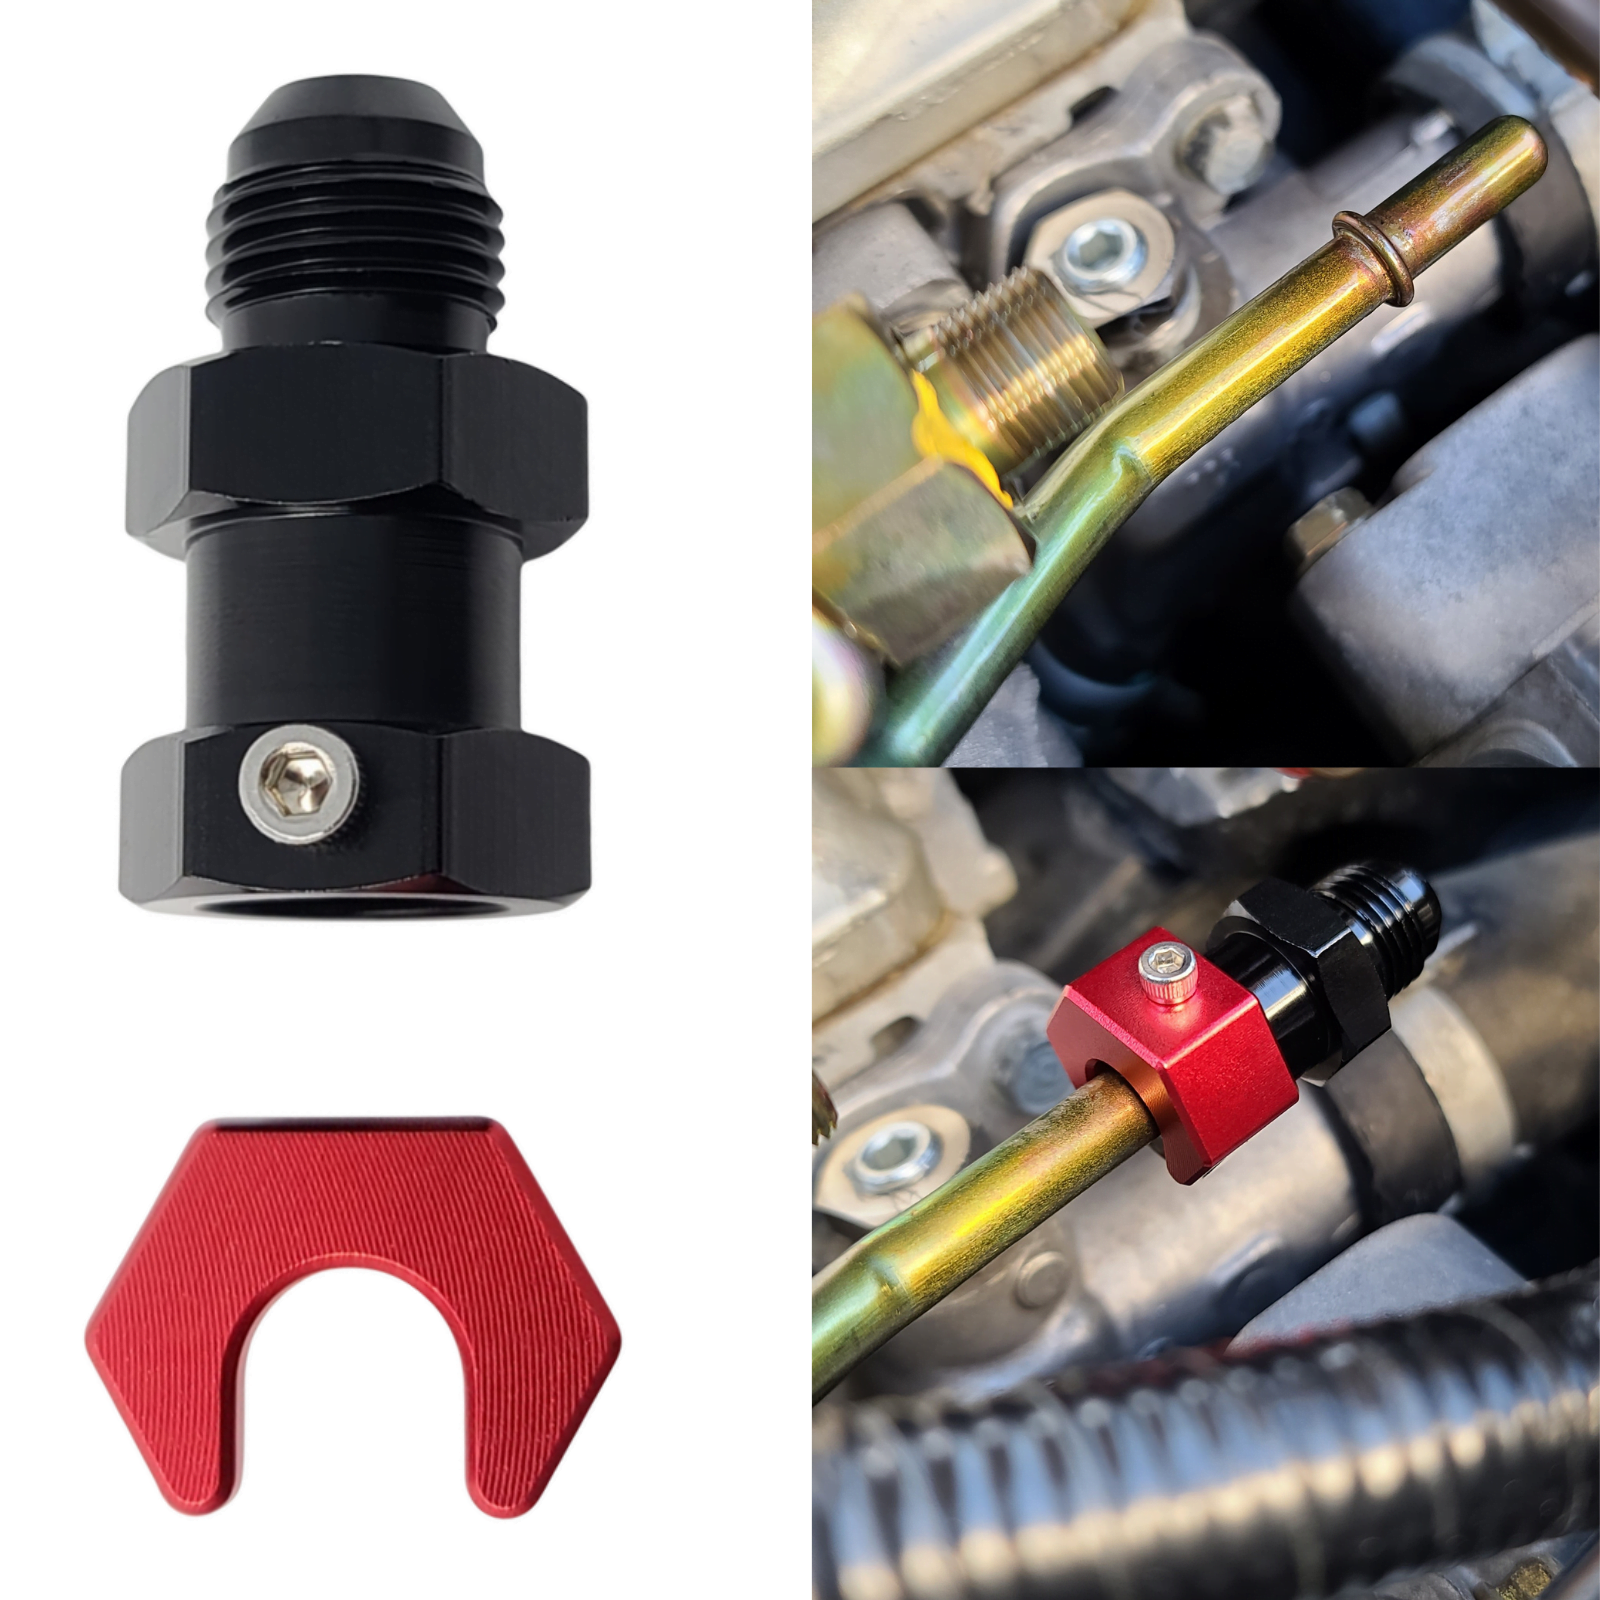 https://kmotorperformance.com/wp-content/uploads/2021/06/6AN-to-38-Push-on-Fitting-for-Hardline-Sae-Quick-Connect-EFI-Adapter-AN6.png